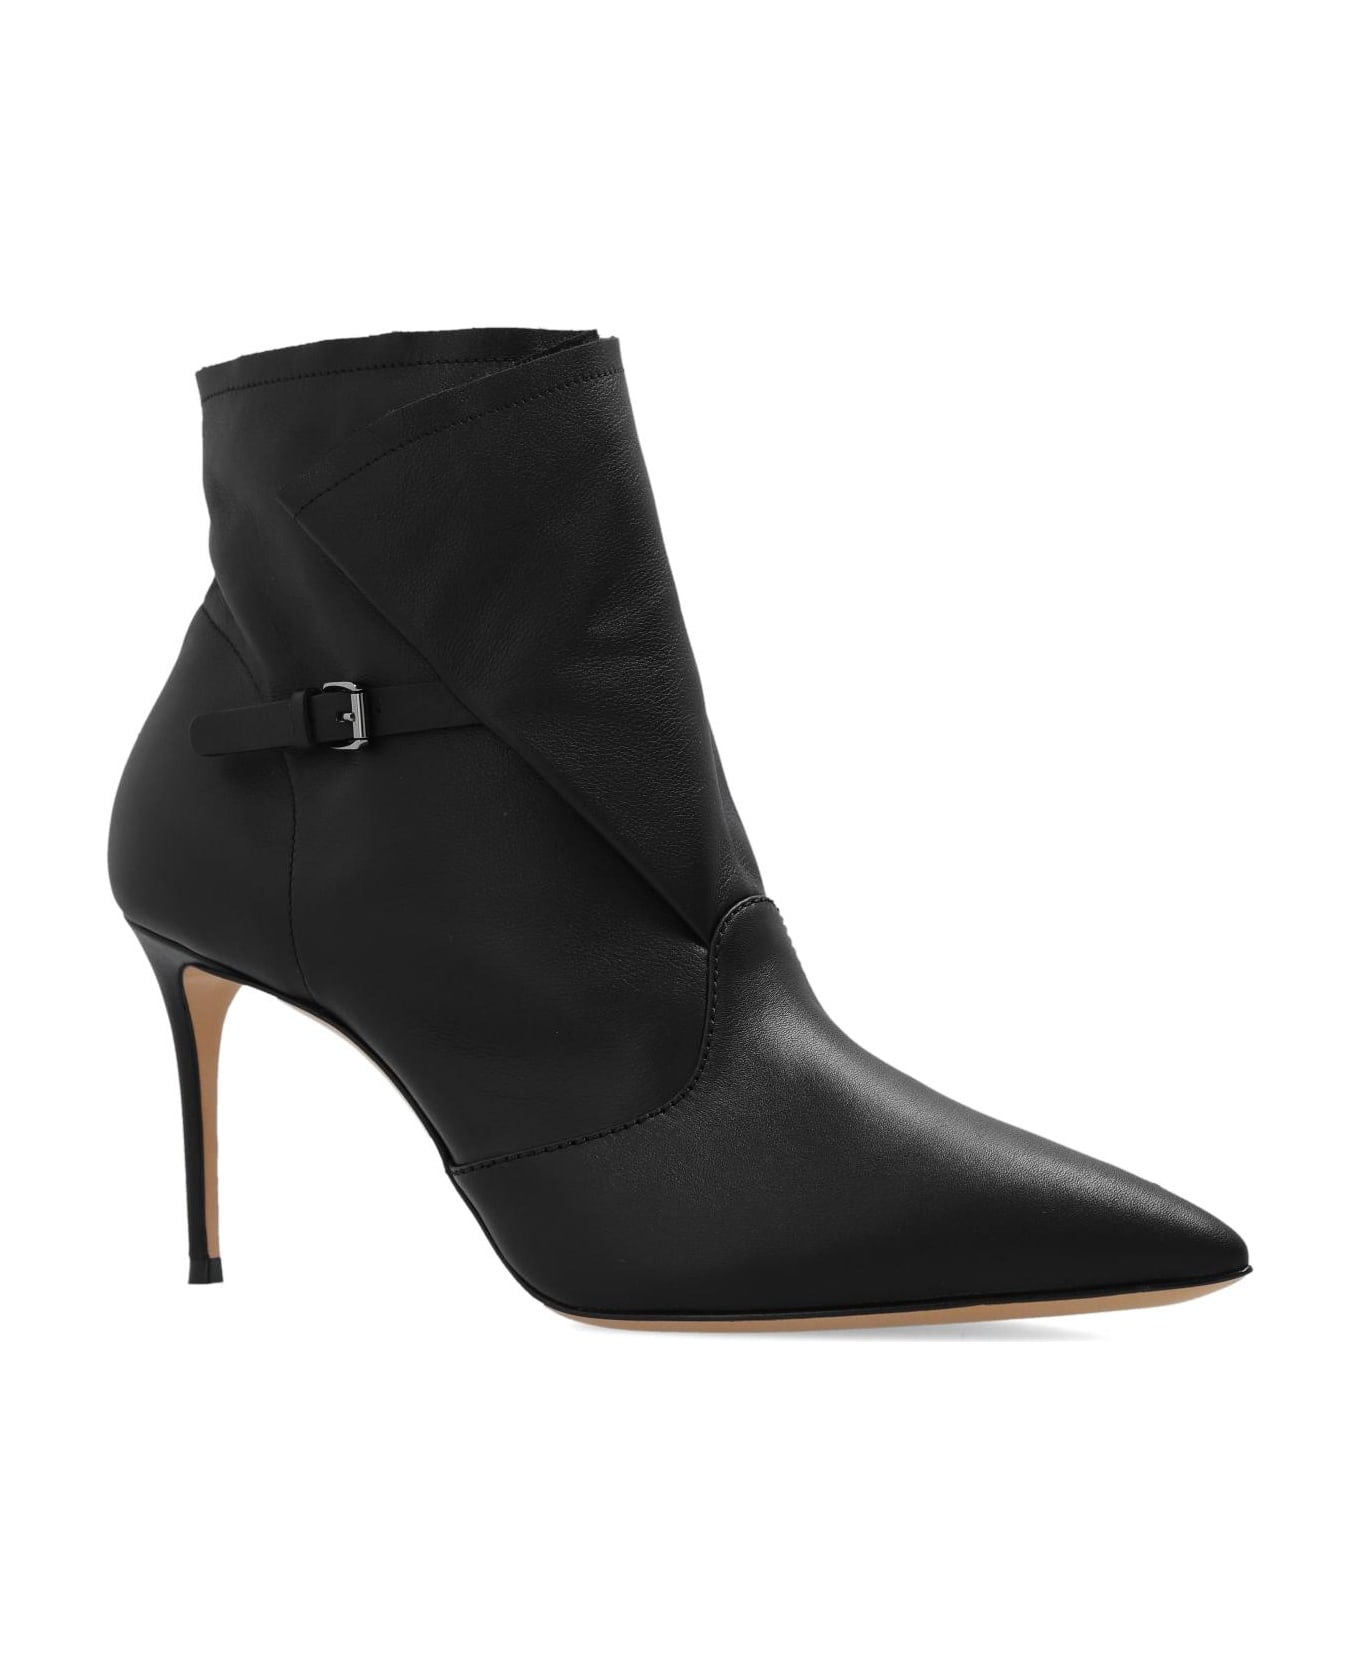 Casadei 'julia Kate' Heeled Ankle Boots - BLACK ブーツ